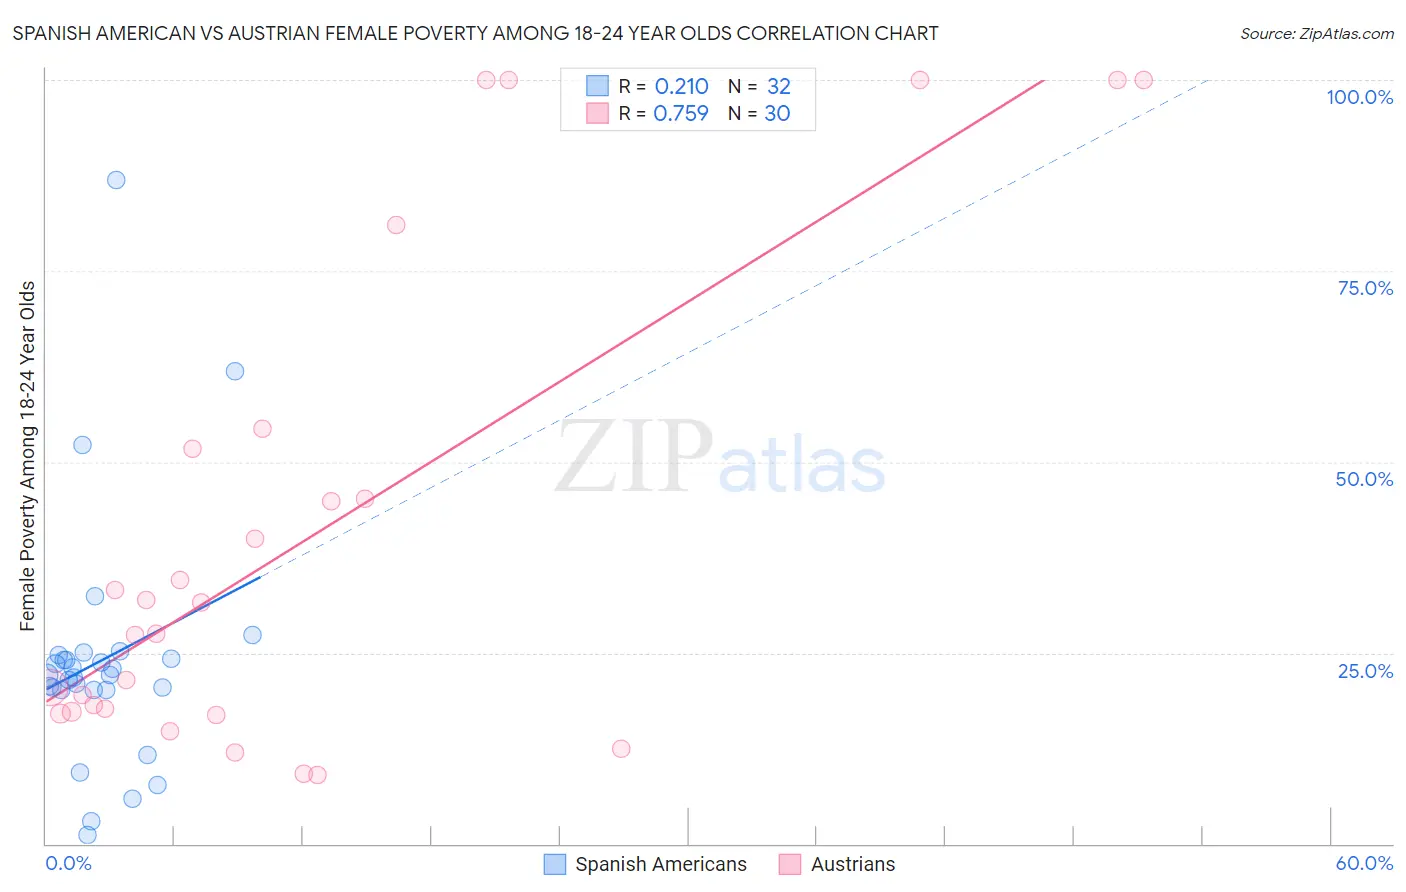 Spanish American vs Austrian Female Poverty Among 18-24 Year Olds